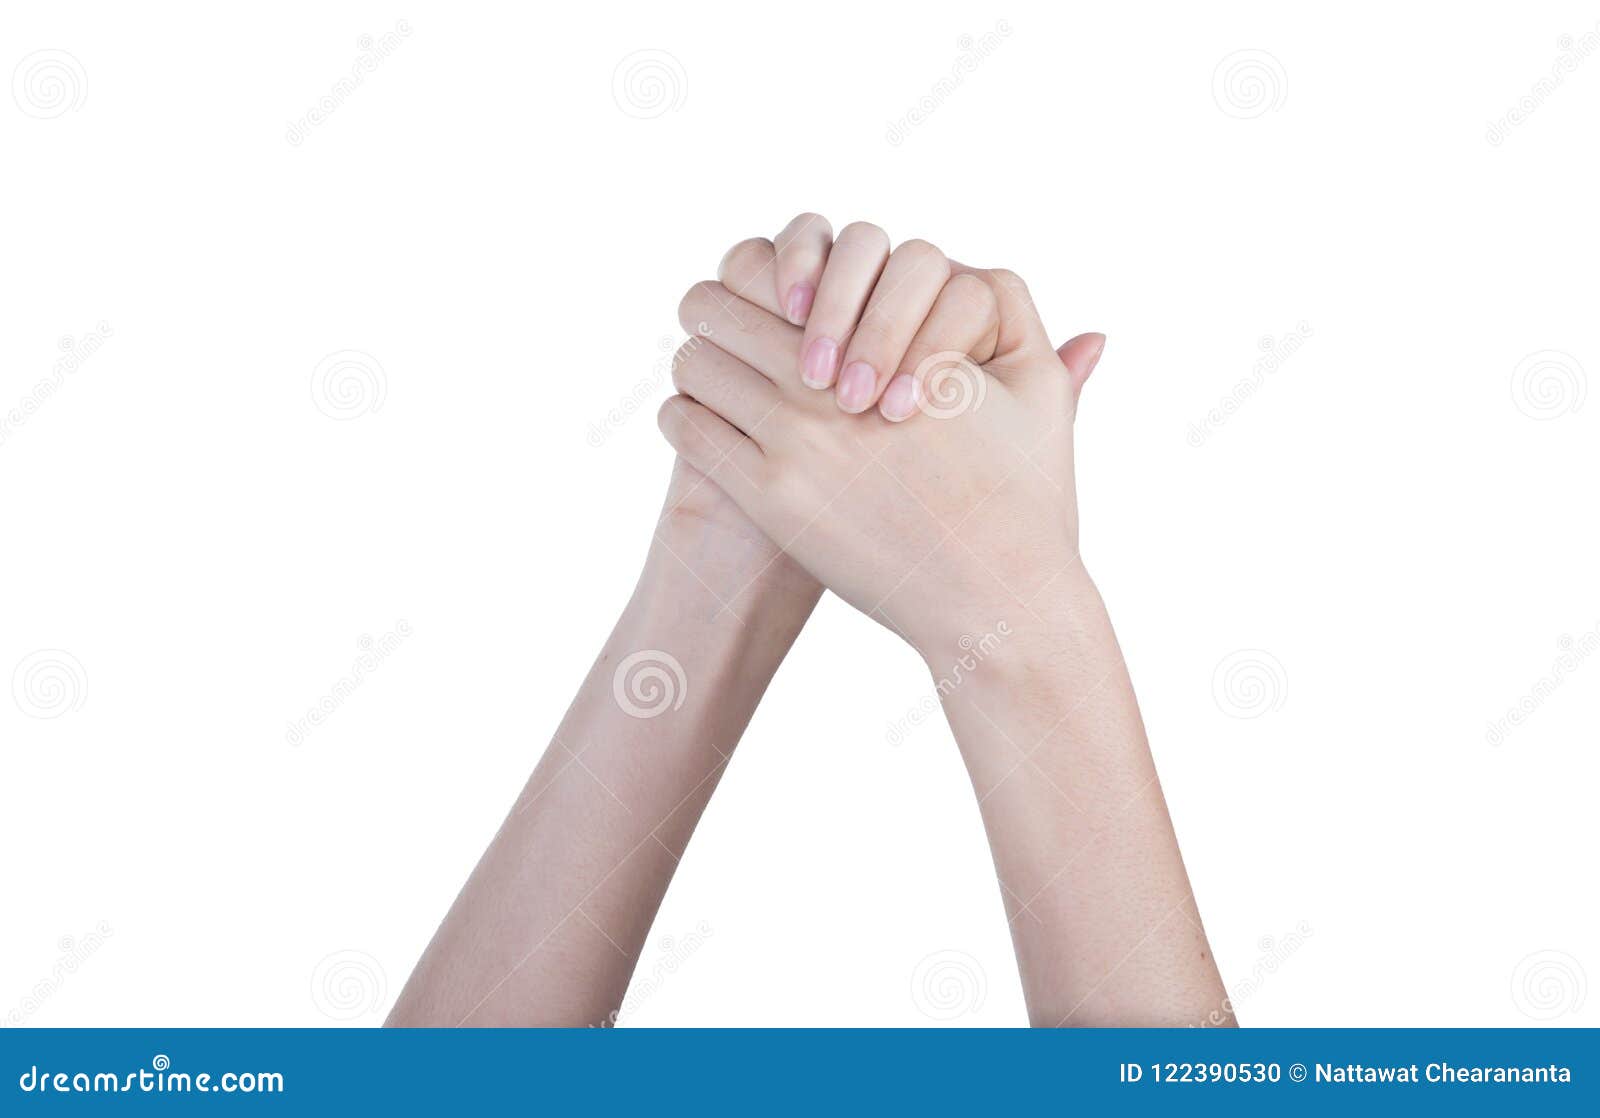 Female Beautiful Talent Hand Arm And Fingers In Good Shape Figure Stock Photo Image Of Asian Business